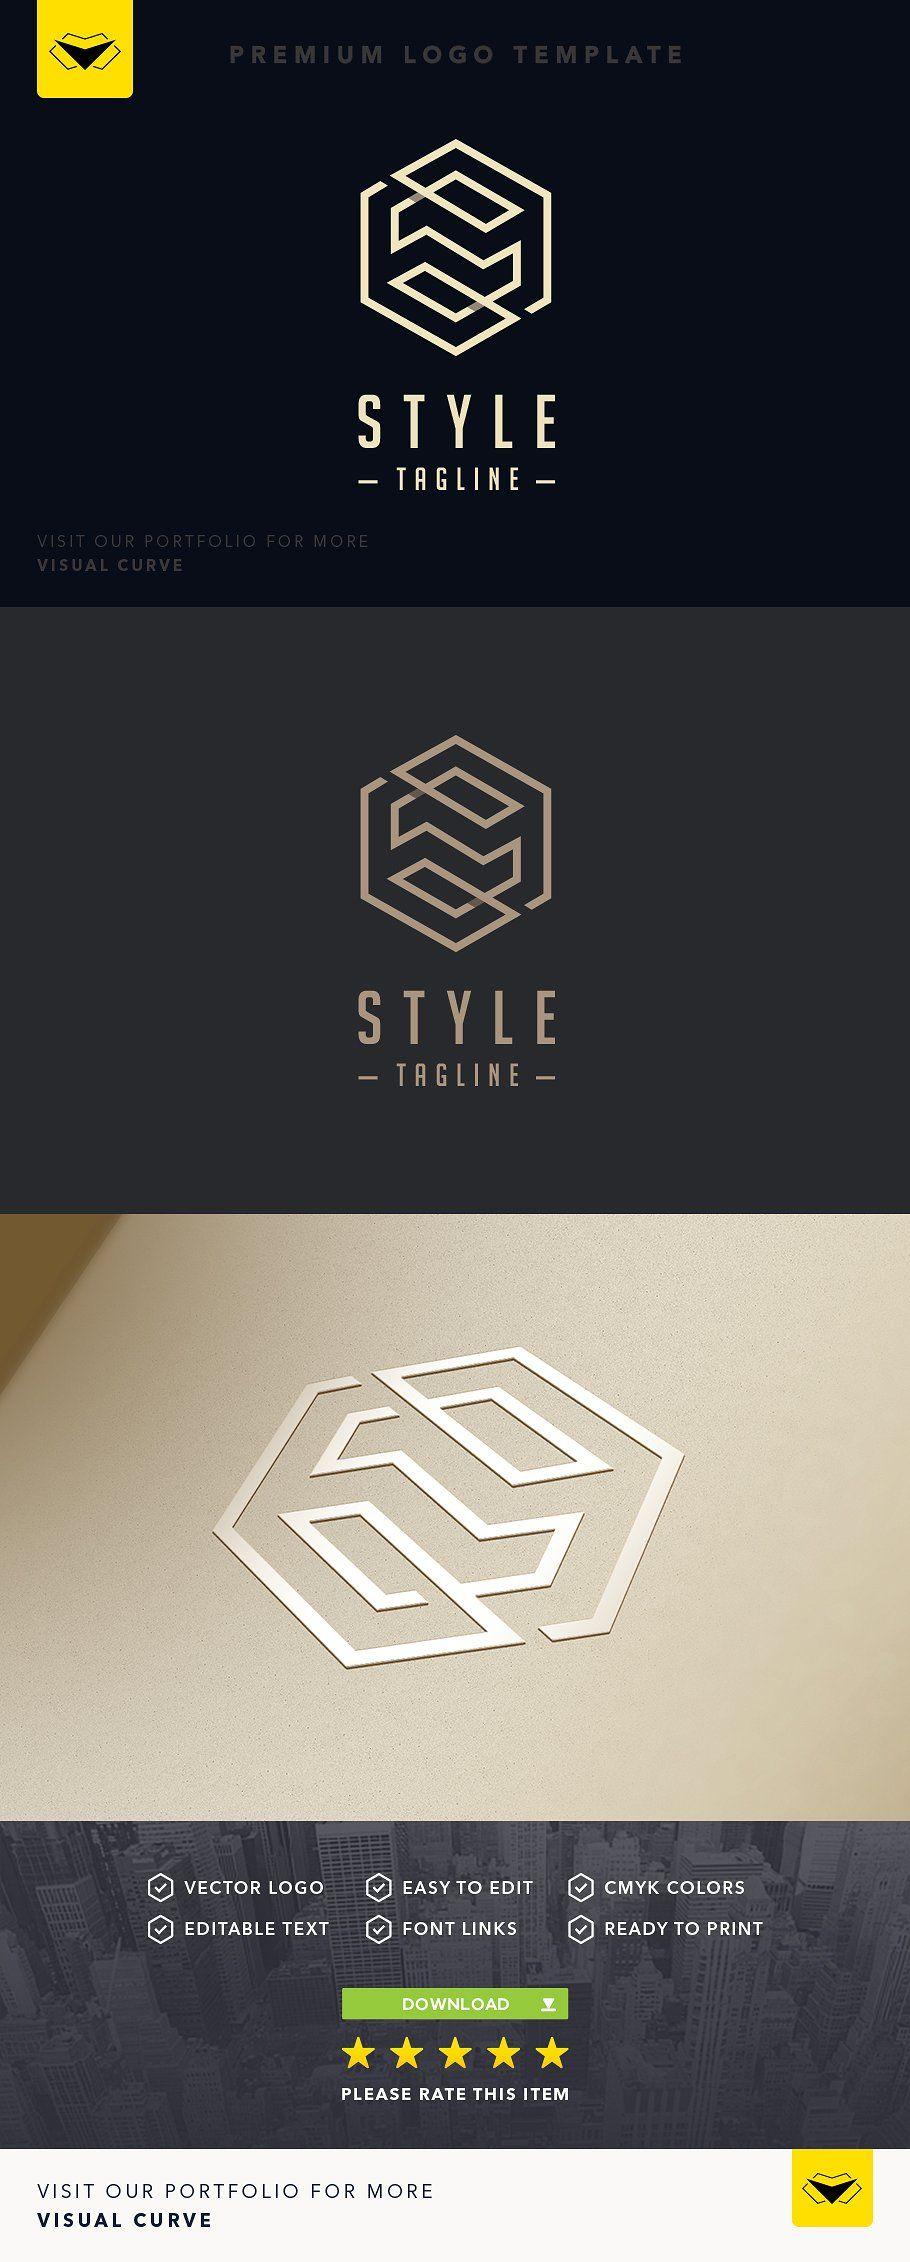 Hexagon Corporate Logo - Letter S Logo by VisualCurve brand, business